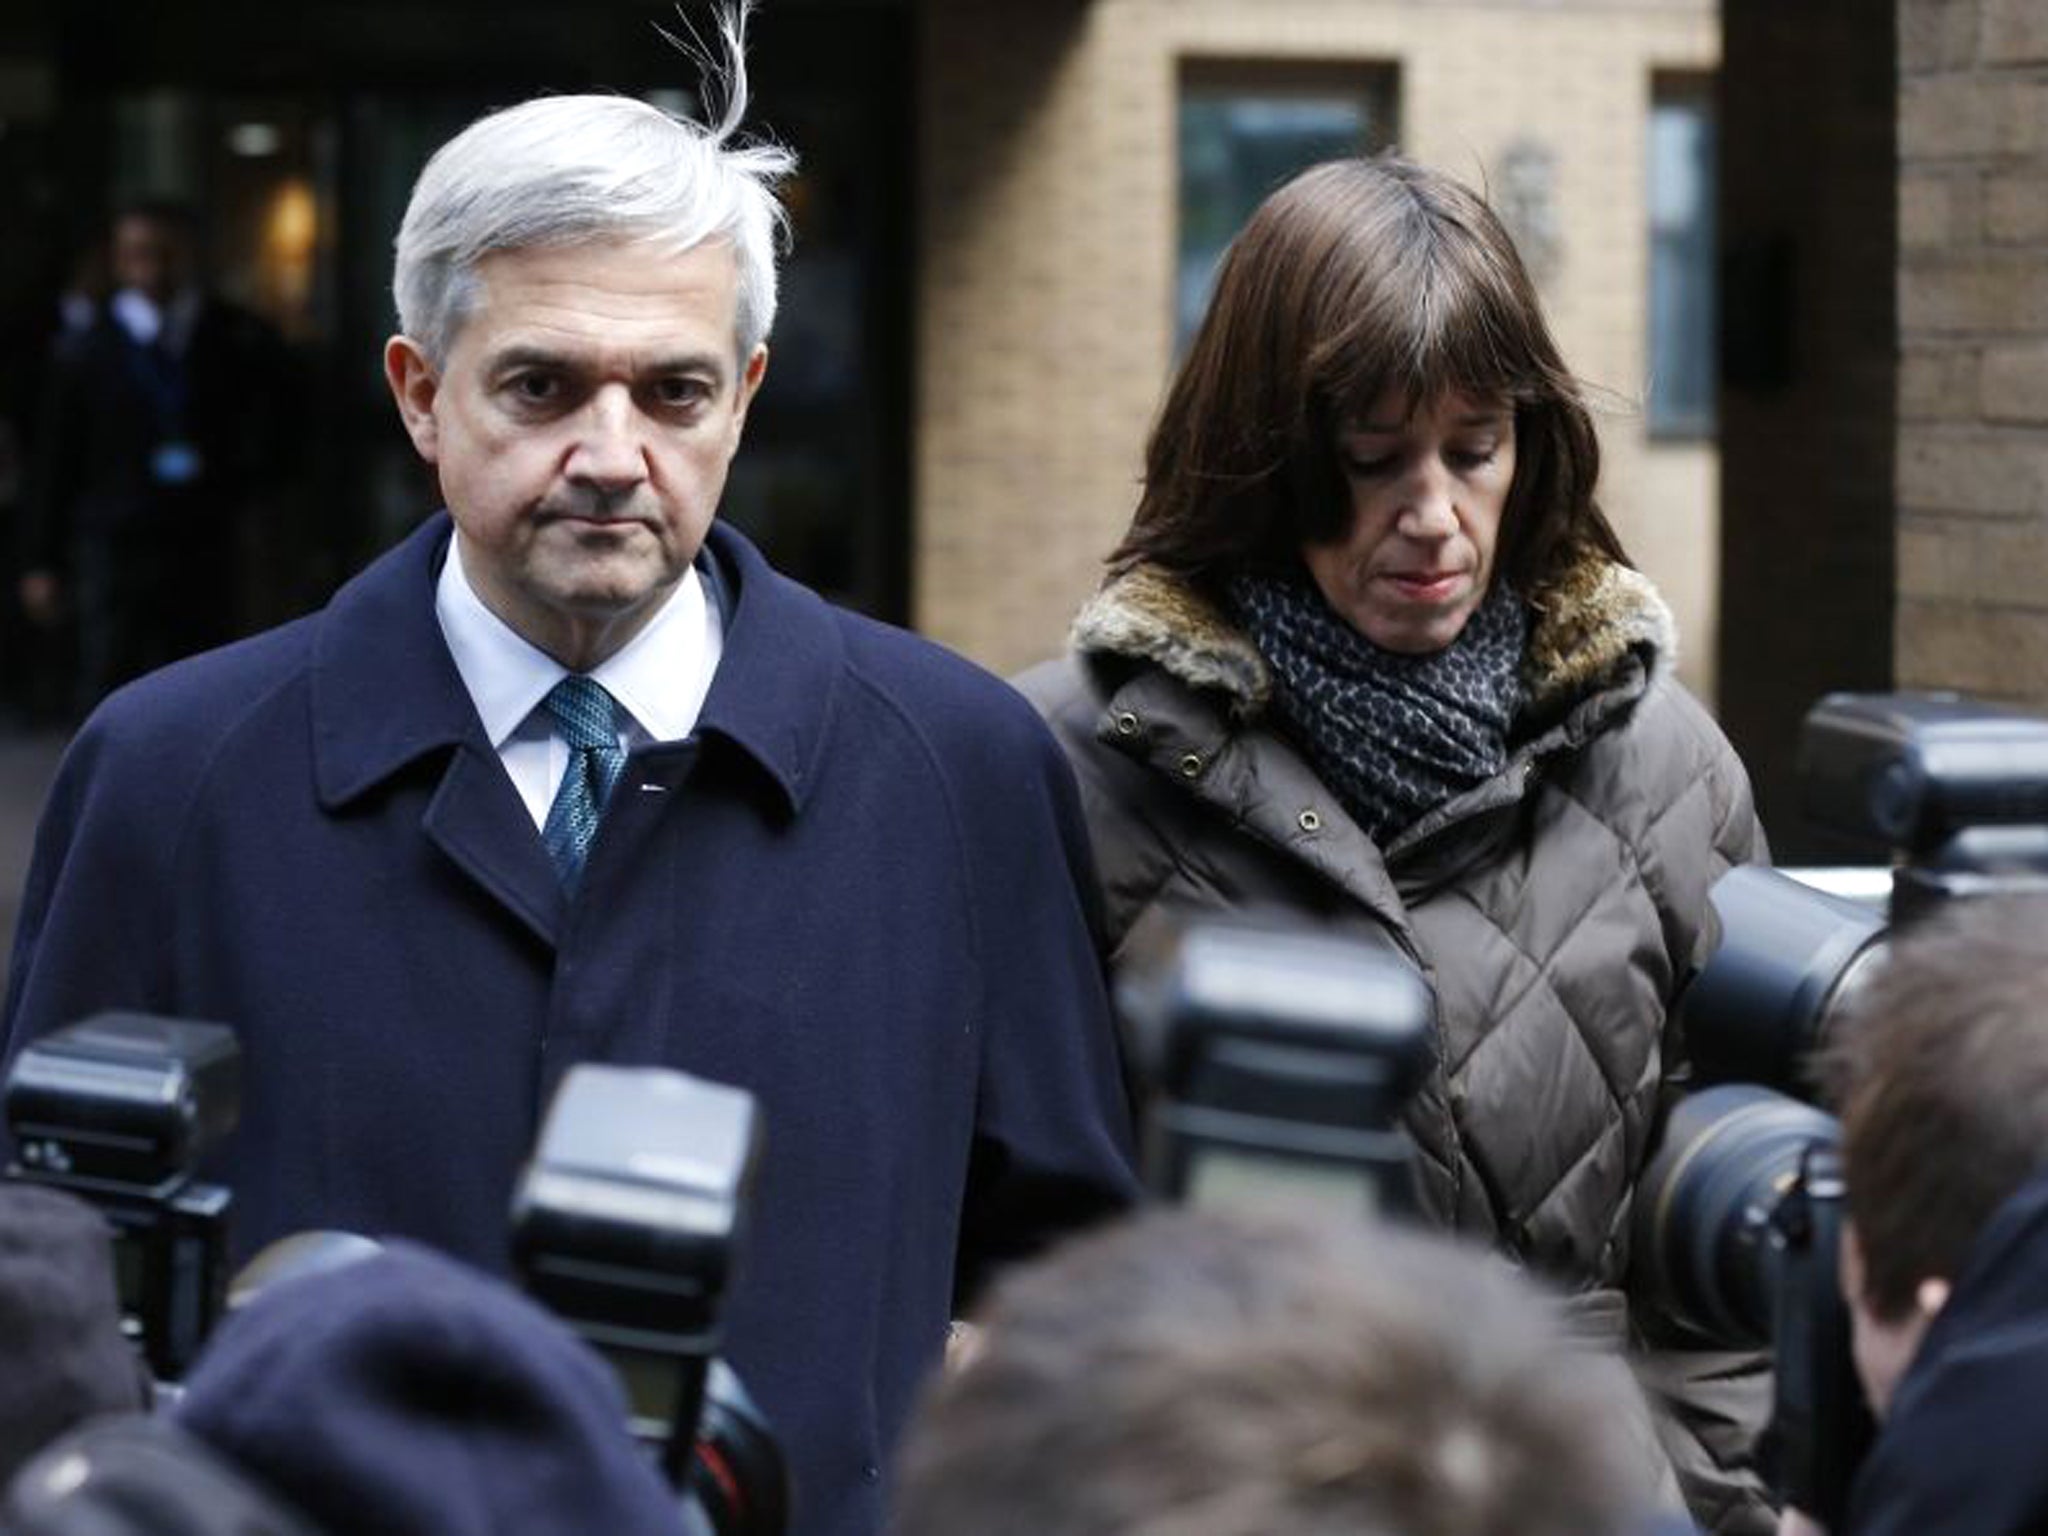 Former Liberal Democrat Cabinet minister Chris Huhne, pictured with partner Carina Trimingham, pleaded guilty and resigned as an MP